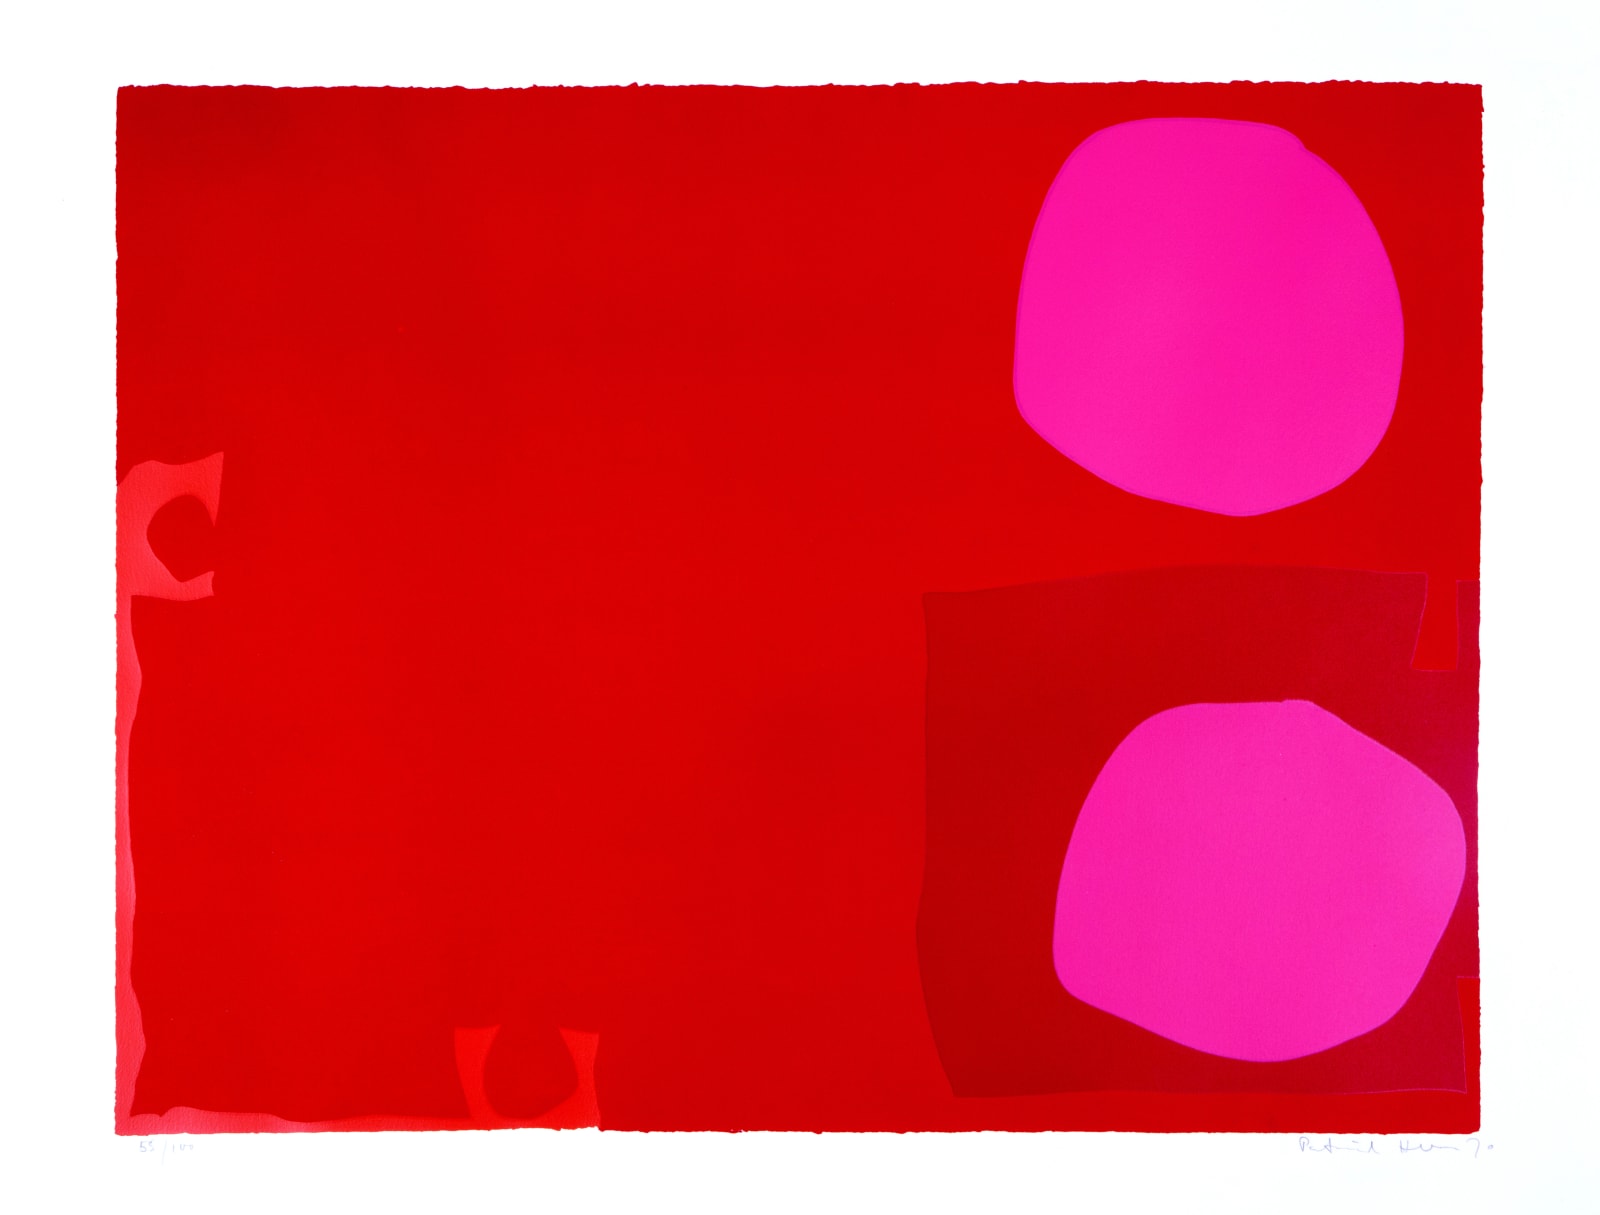 PATRICK HERON, Red and Pink Composition, 1970